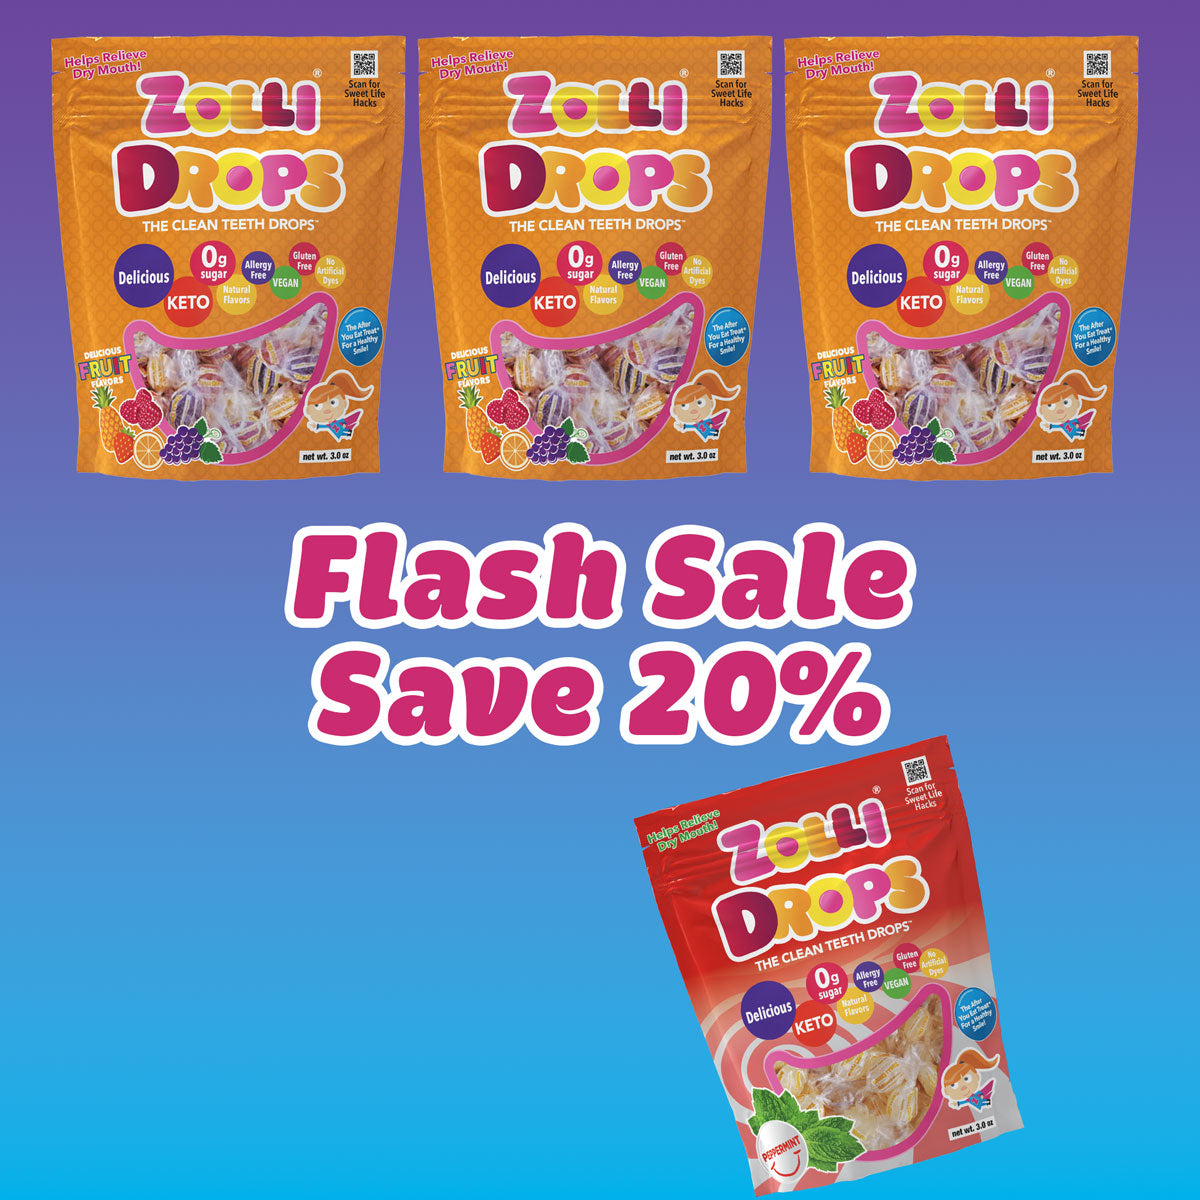 Save 20% on Zolli Drops - Get 3 Fruit Drops and 1 Peppermint Drops 